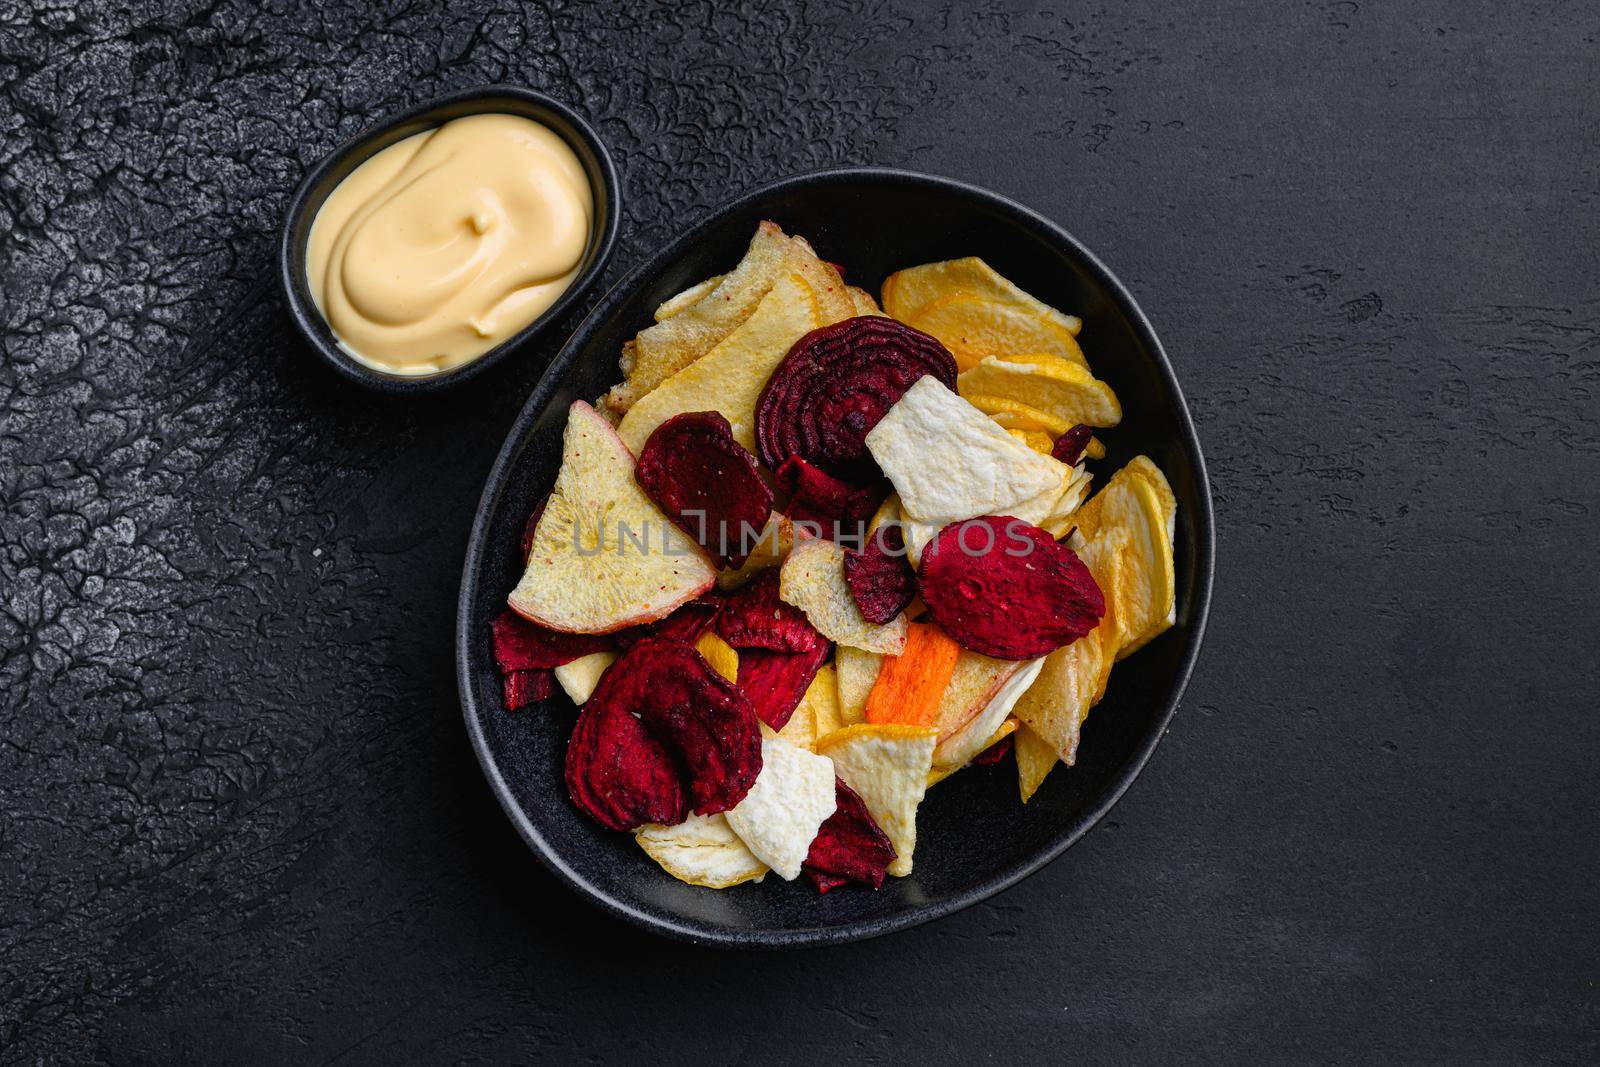 Beetroot carrot and turnip chips by Ilianesolenyi